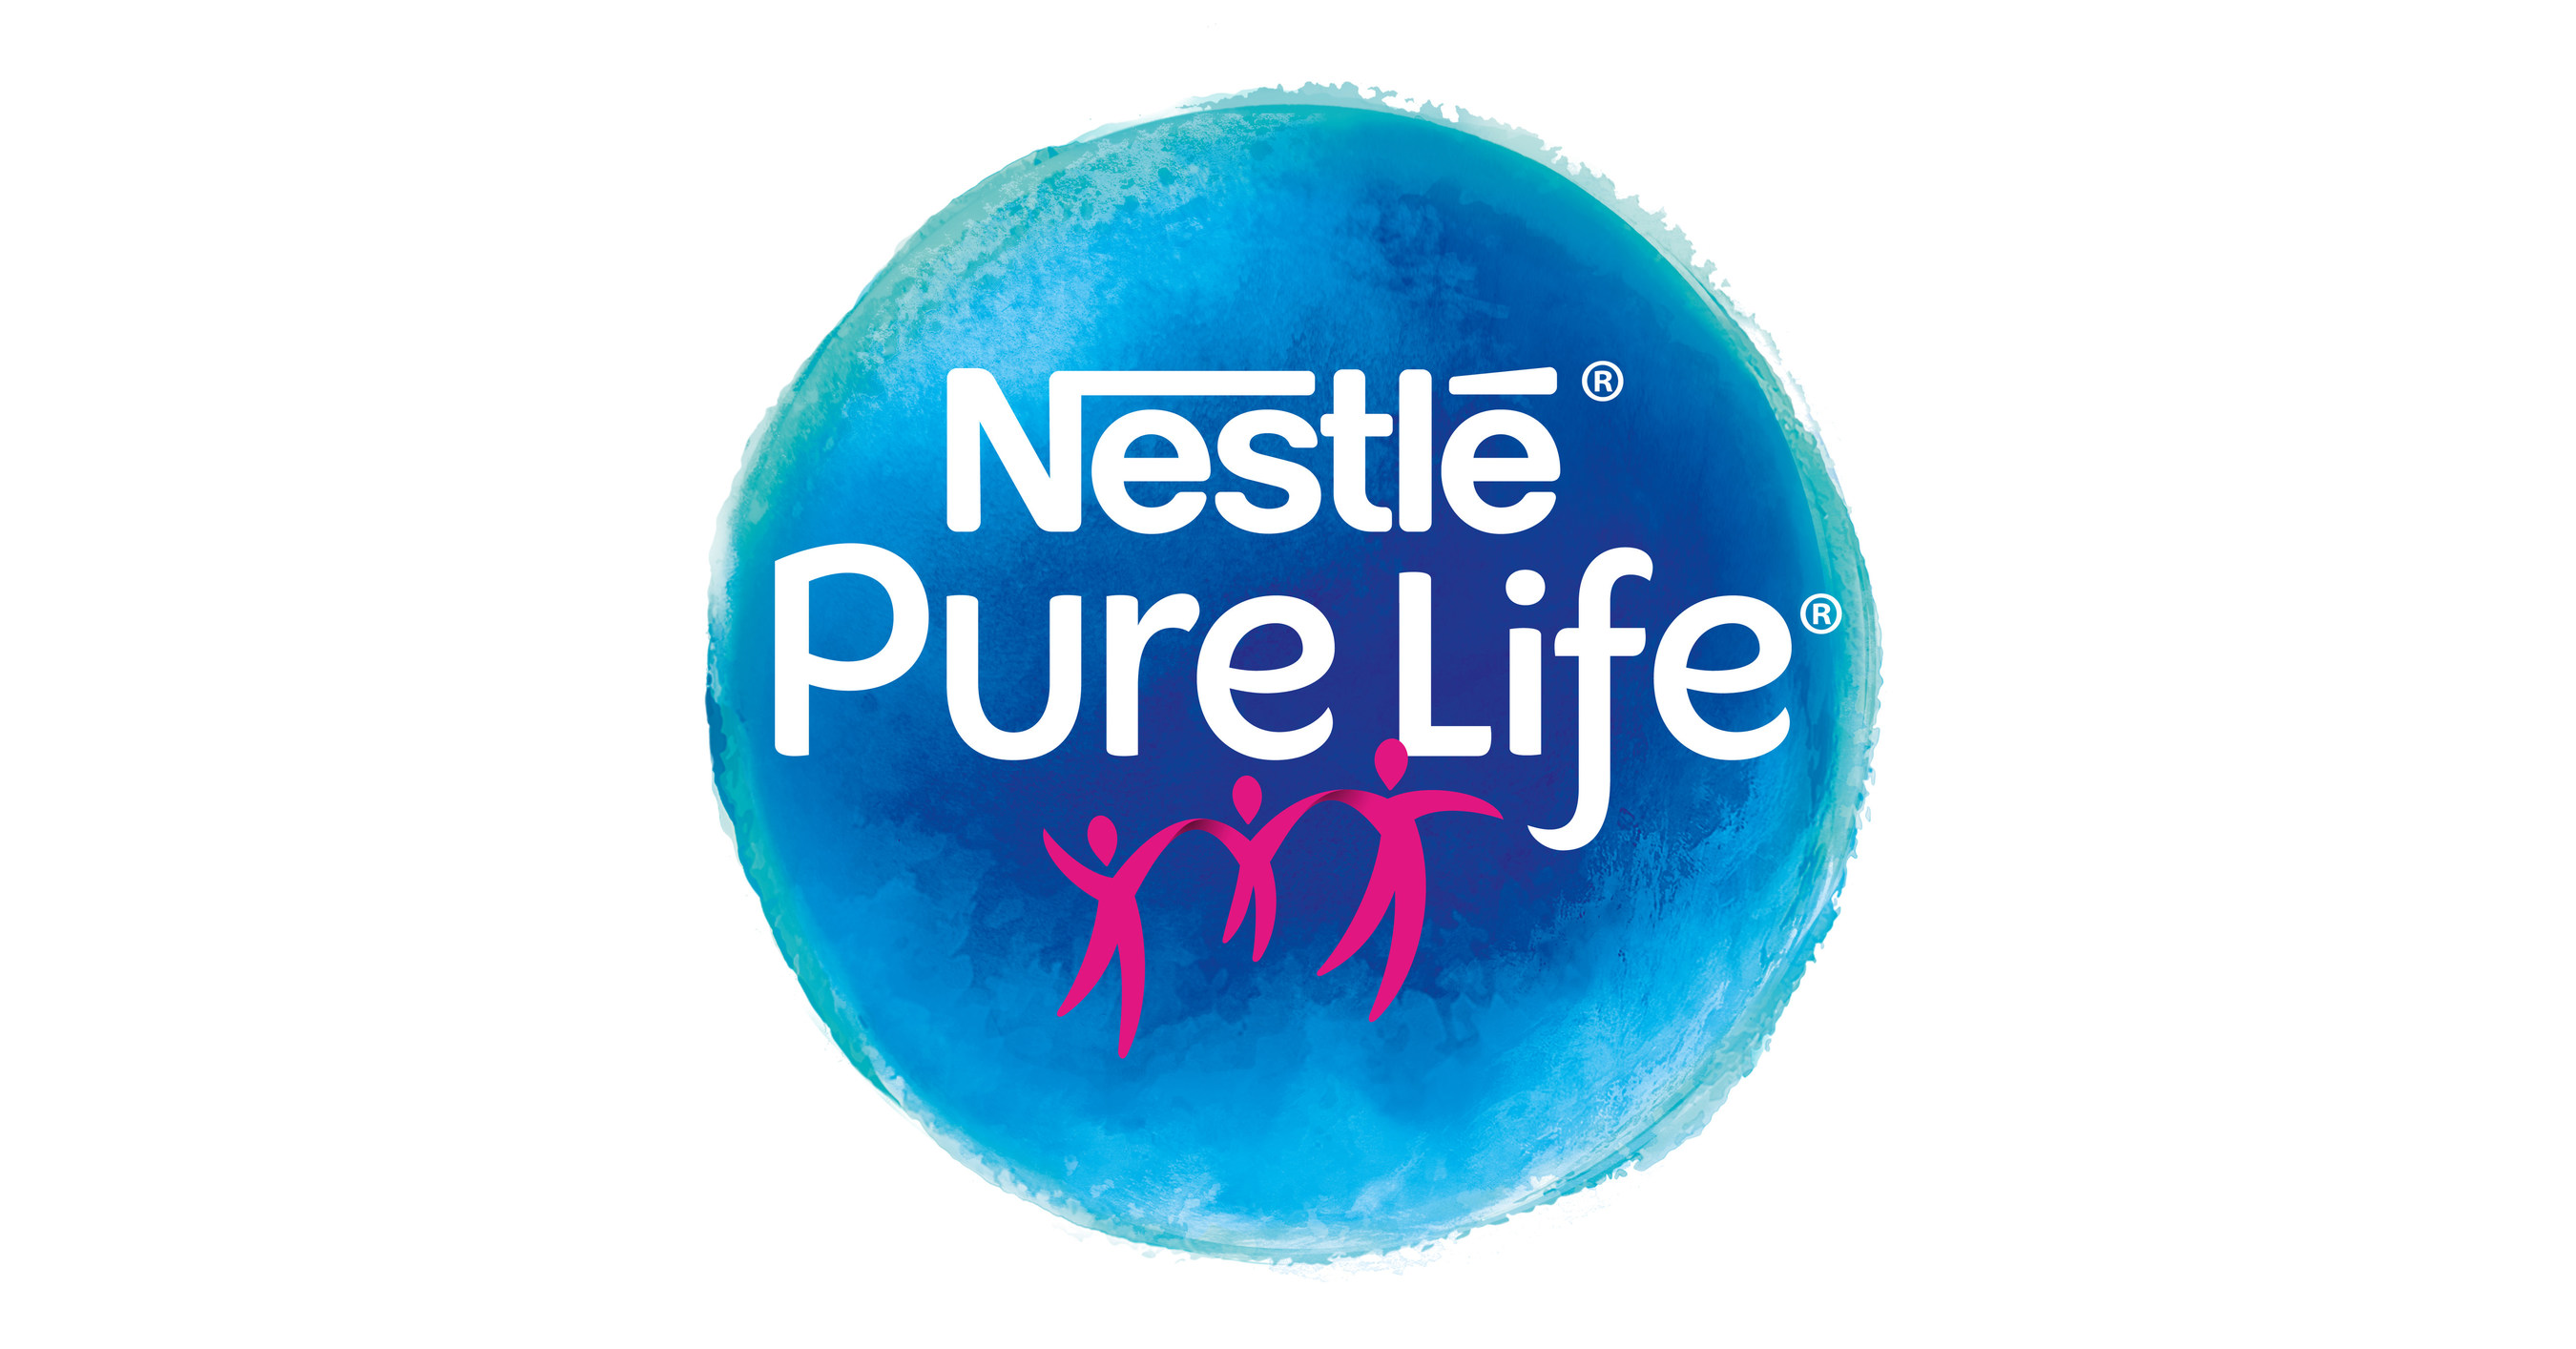 Nestlé Pure Life Purified Water Launches Fruity Water For Kids